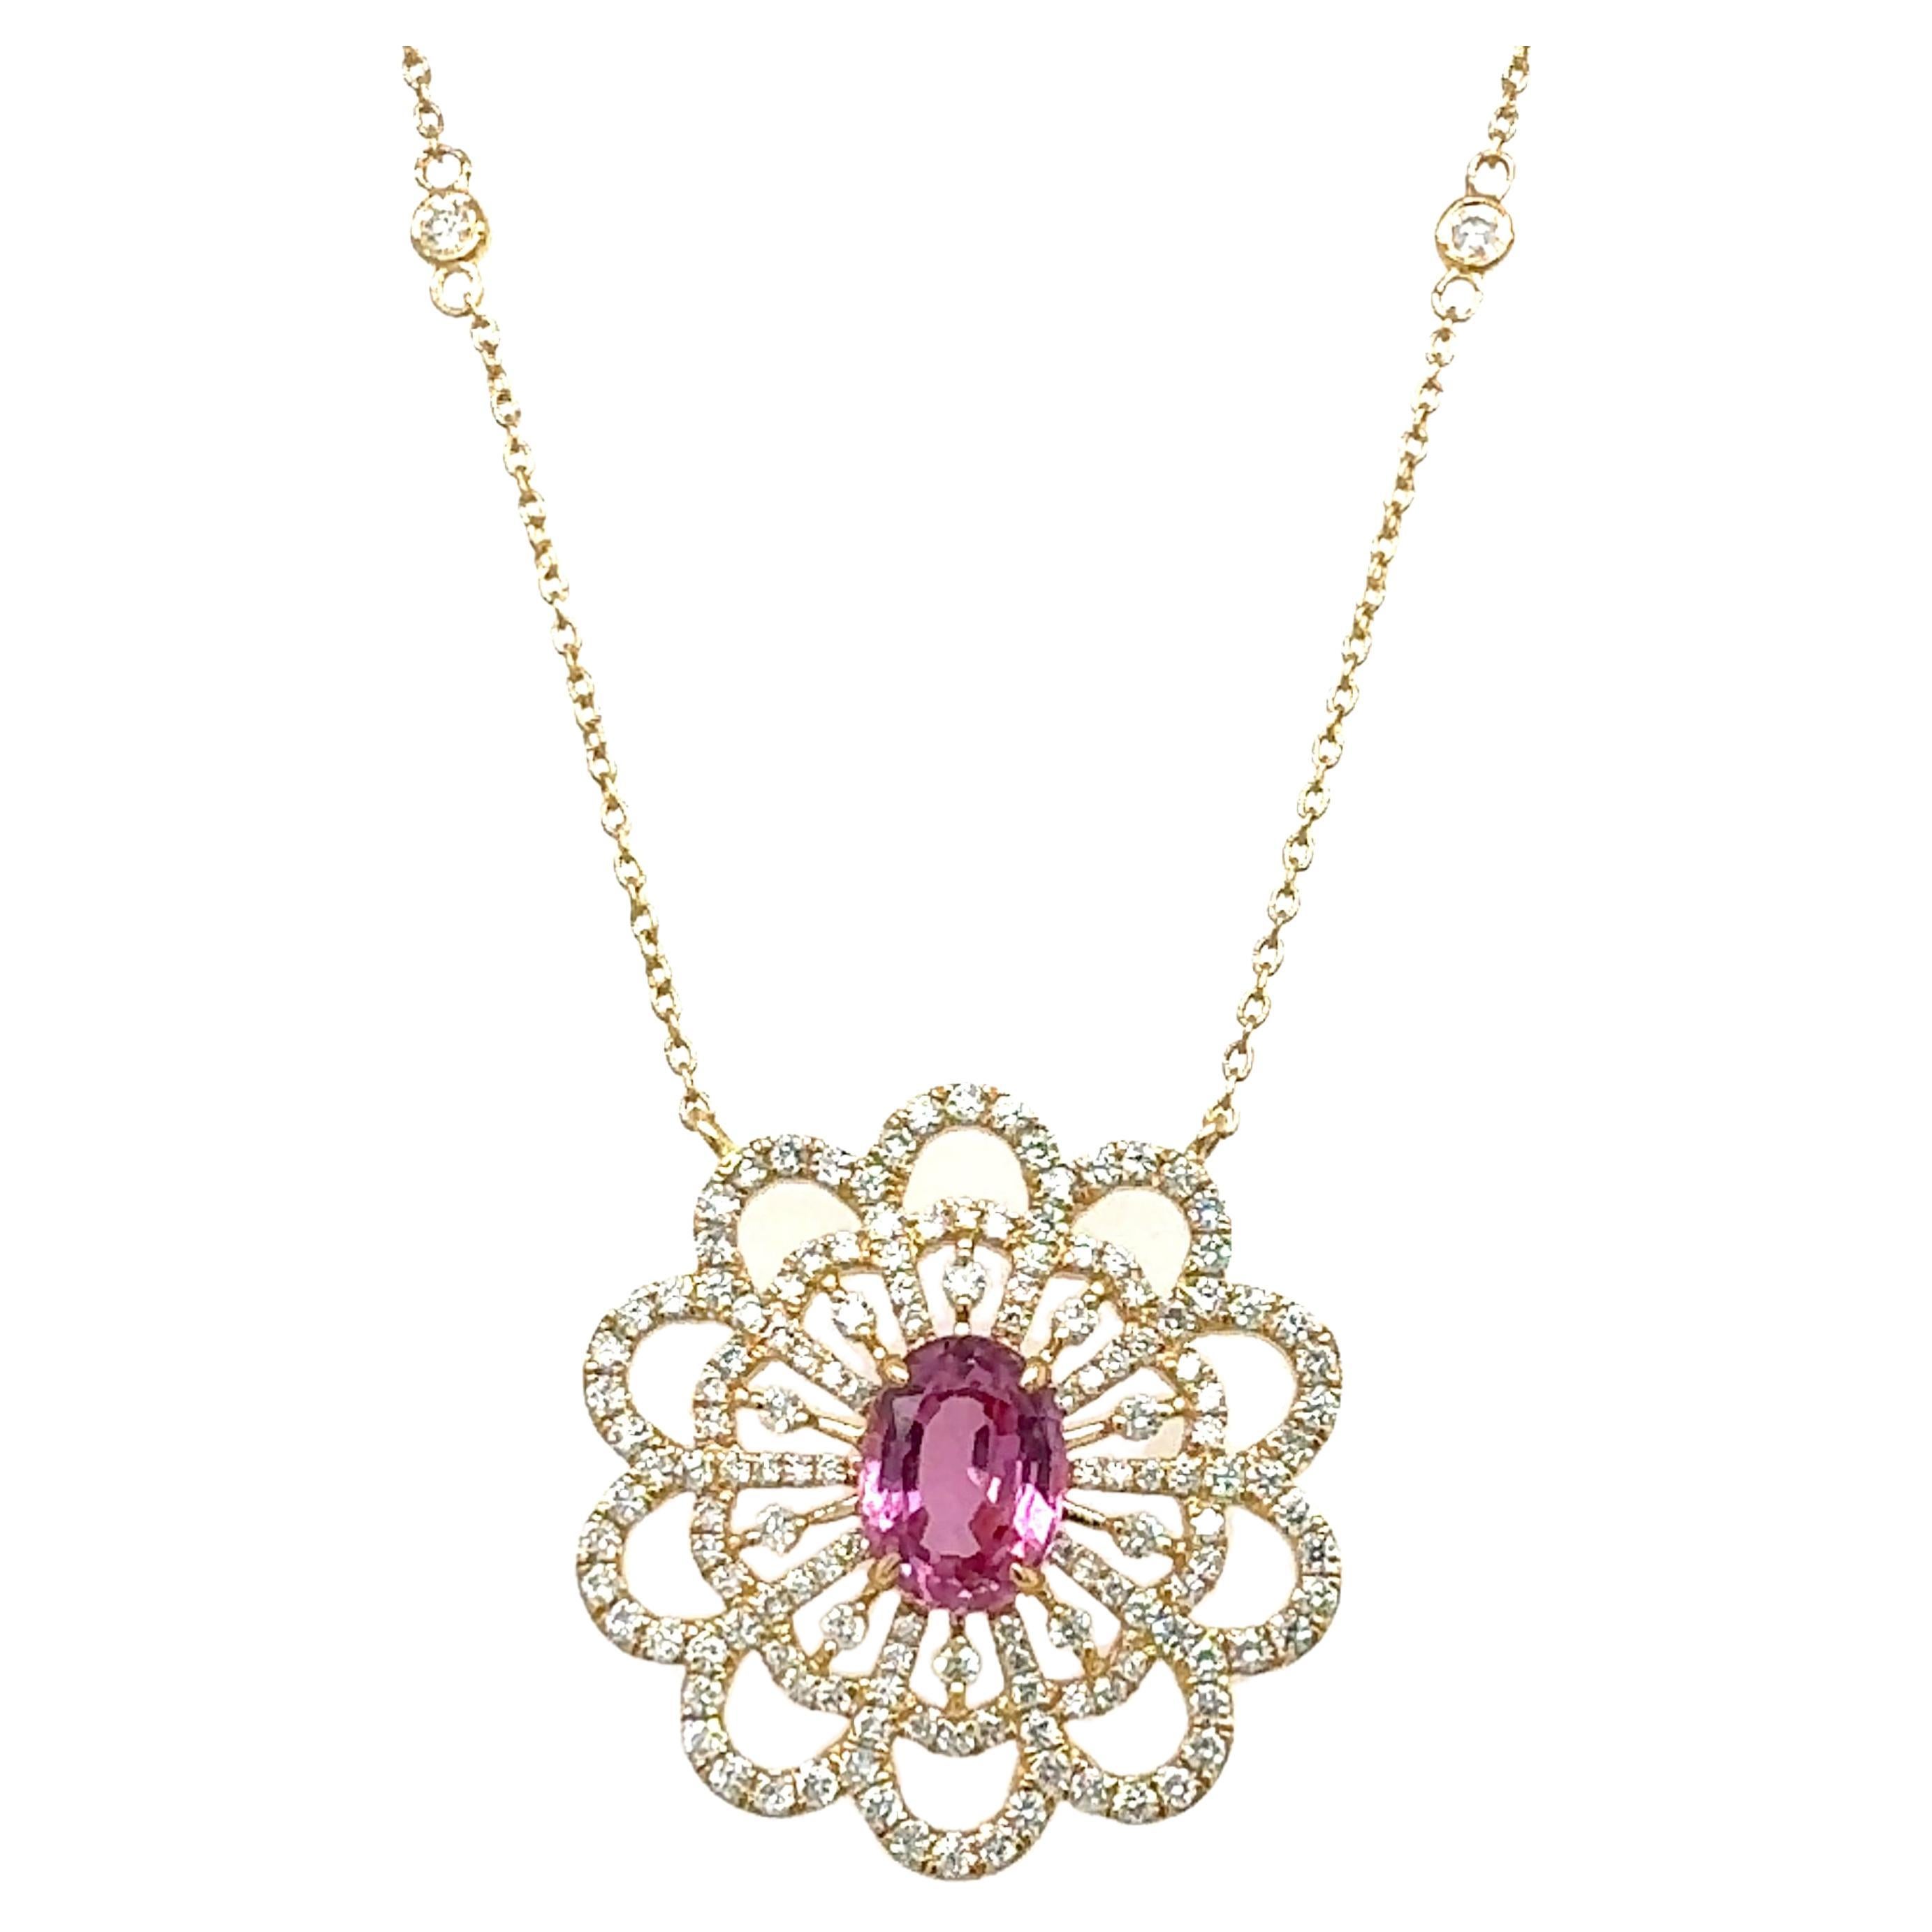 A stunning necklace of natural pink sapphire with diamond